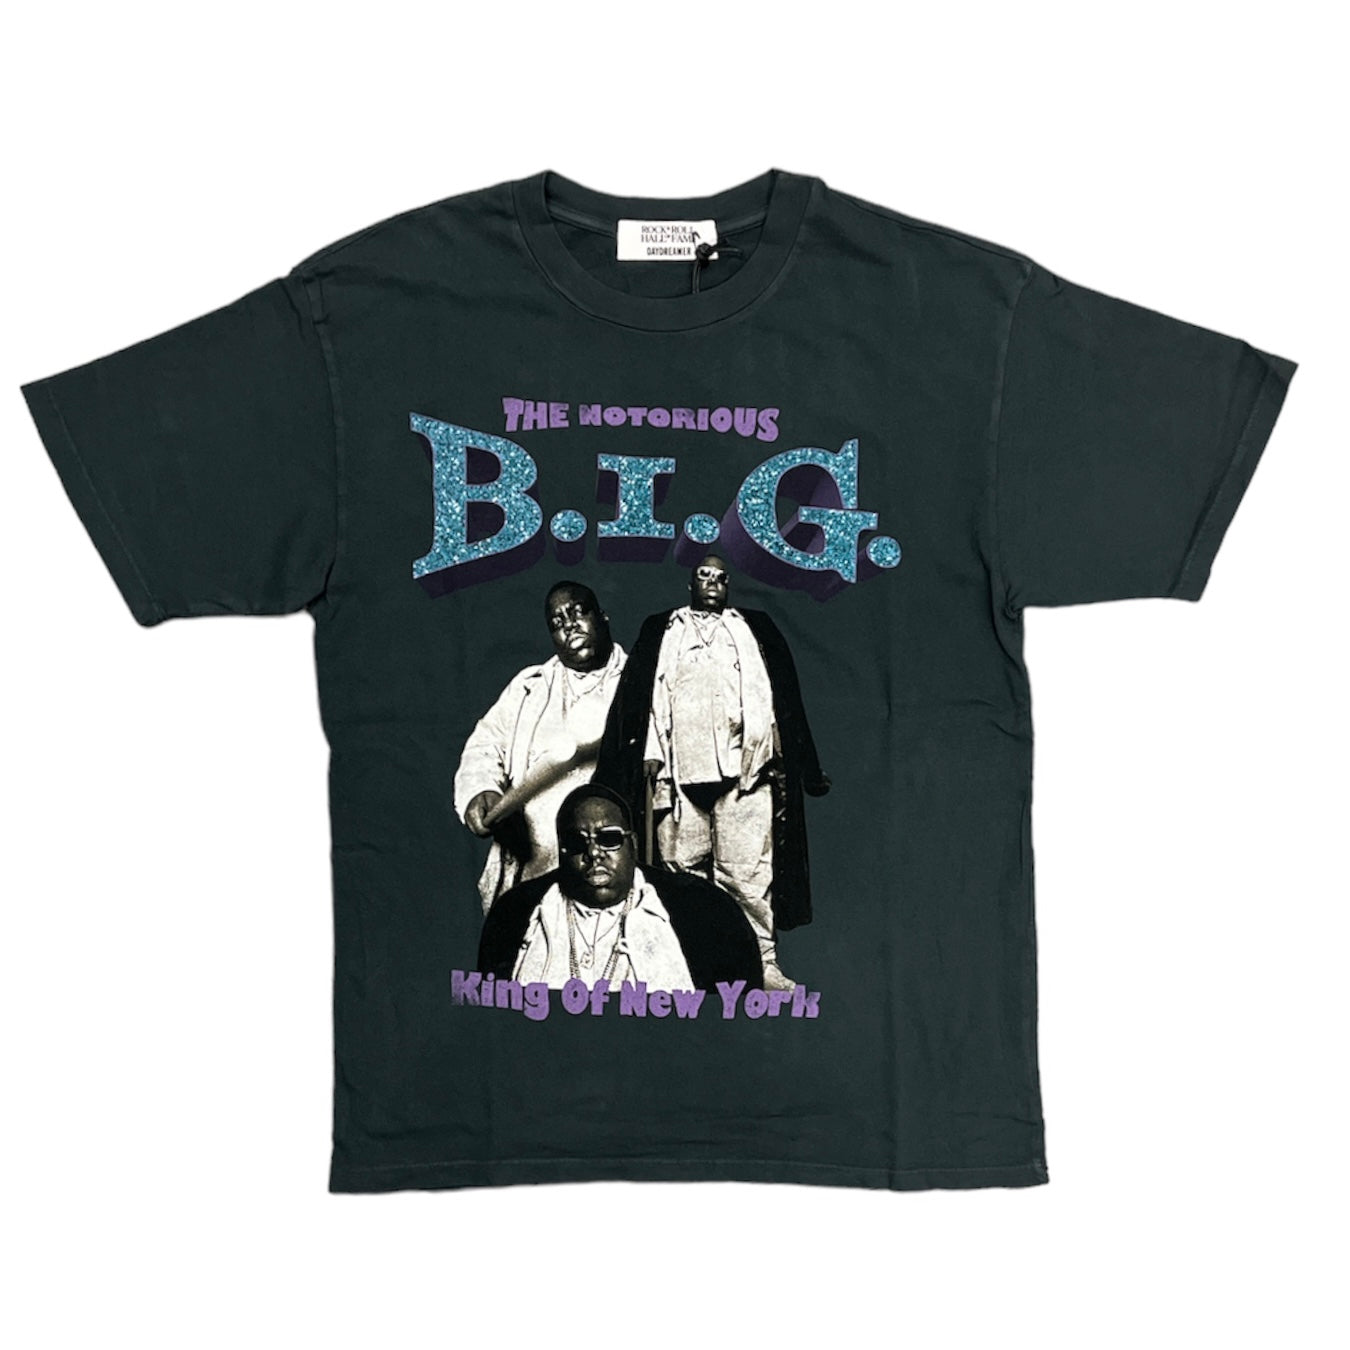 NOTORIOUS B.I.G. - ROCK HALL EXCLUSIVE KING OF NEW YORK UNISEX T-SHIRT